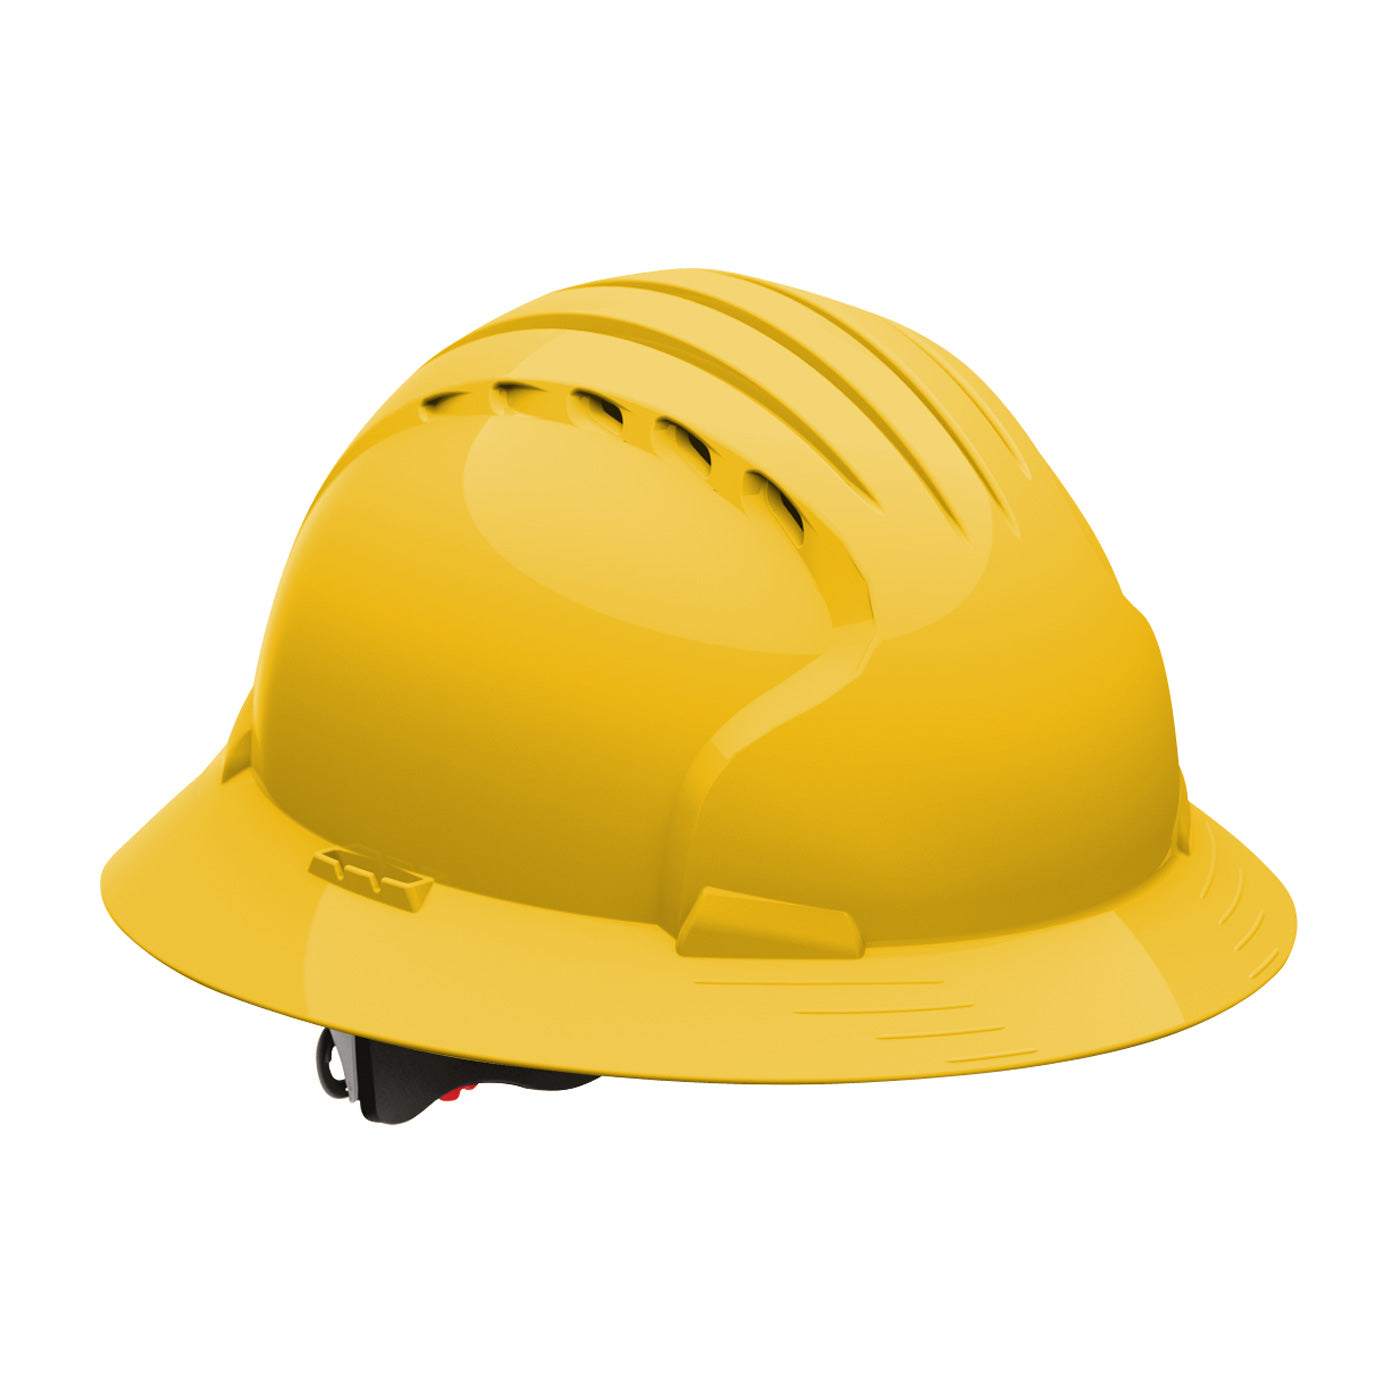 Protective Industrial Products-EVOLUTION™ DELUXE 6161 FULL BRIM HARD HAT (VENTED)